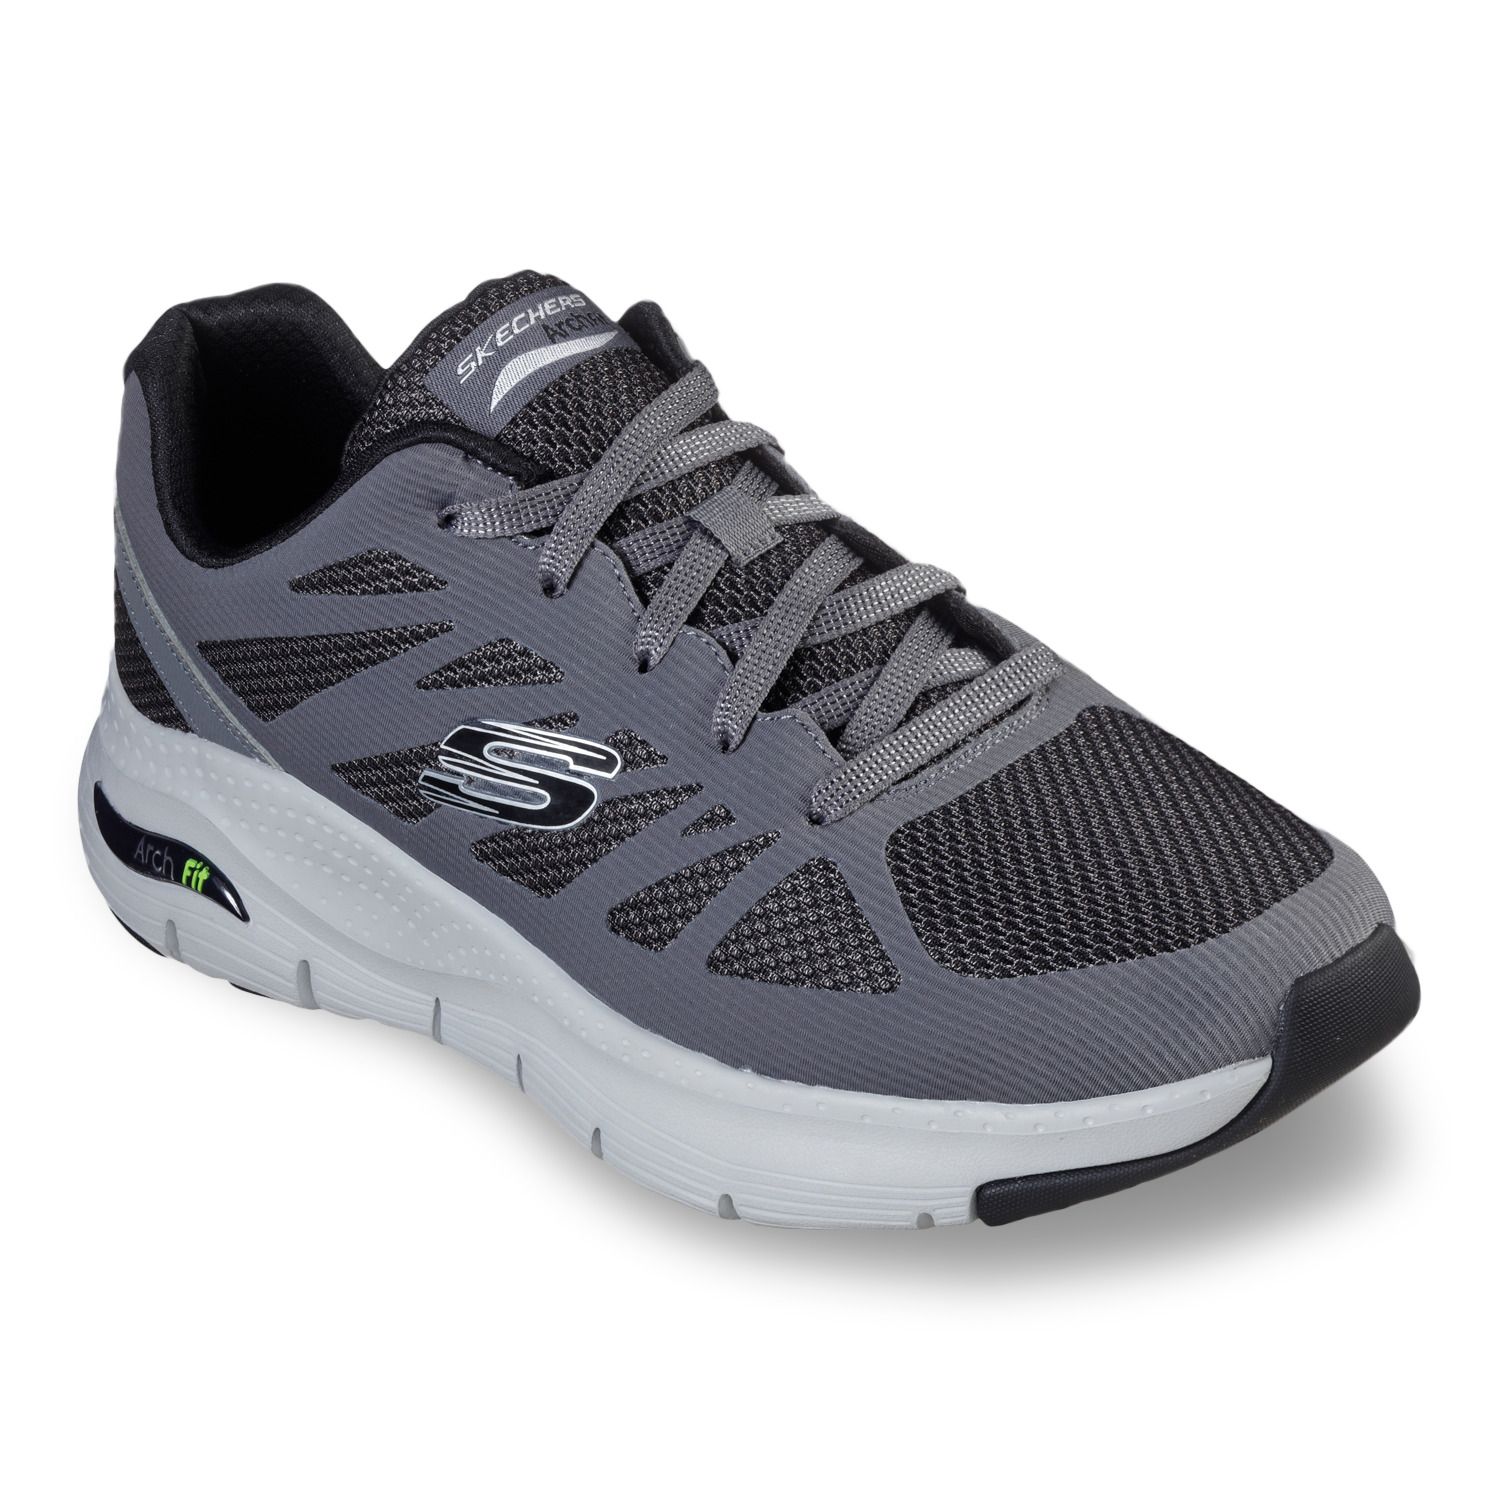 are skechers good for arch support